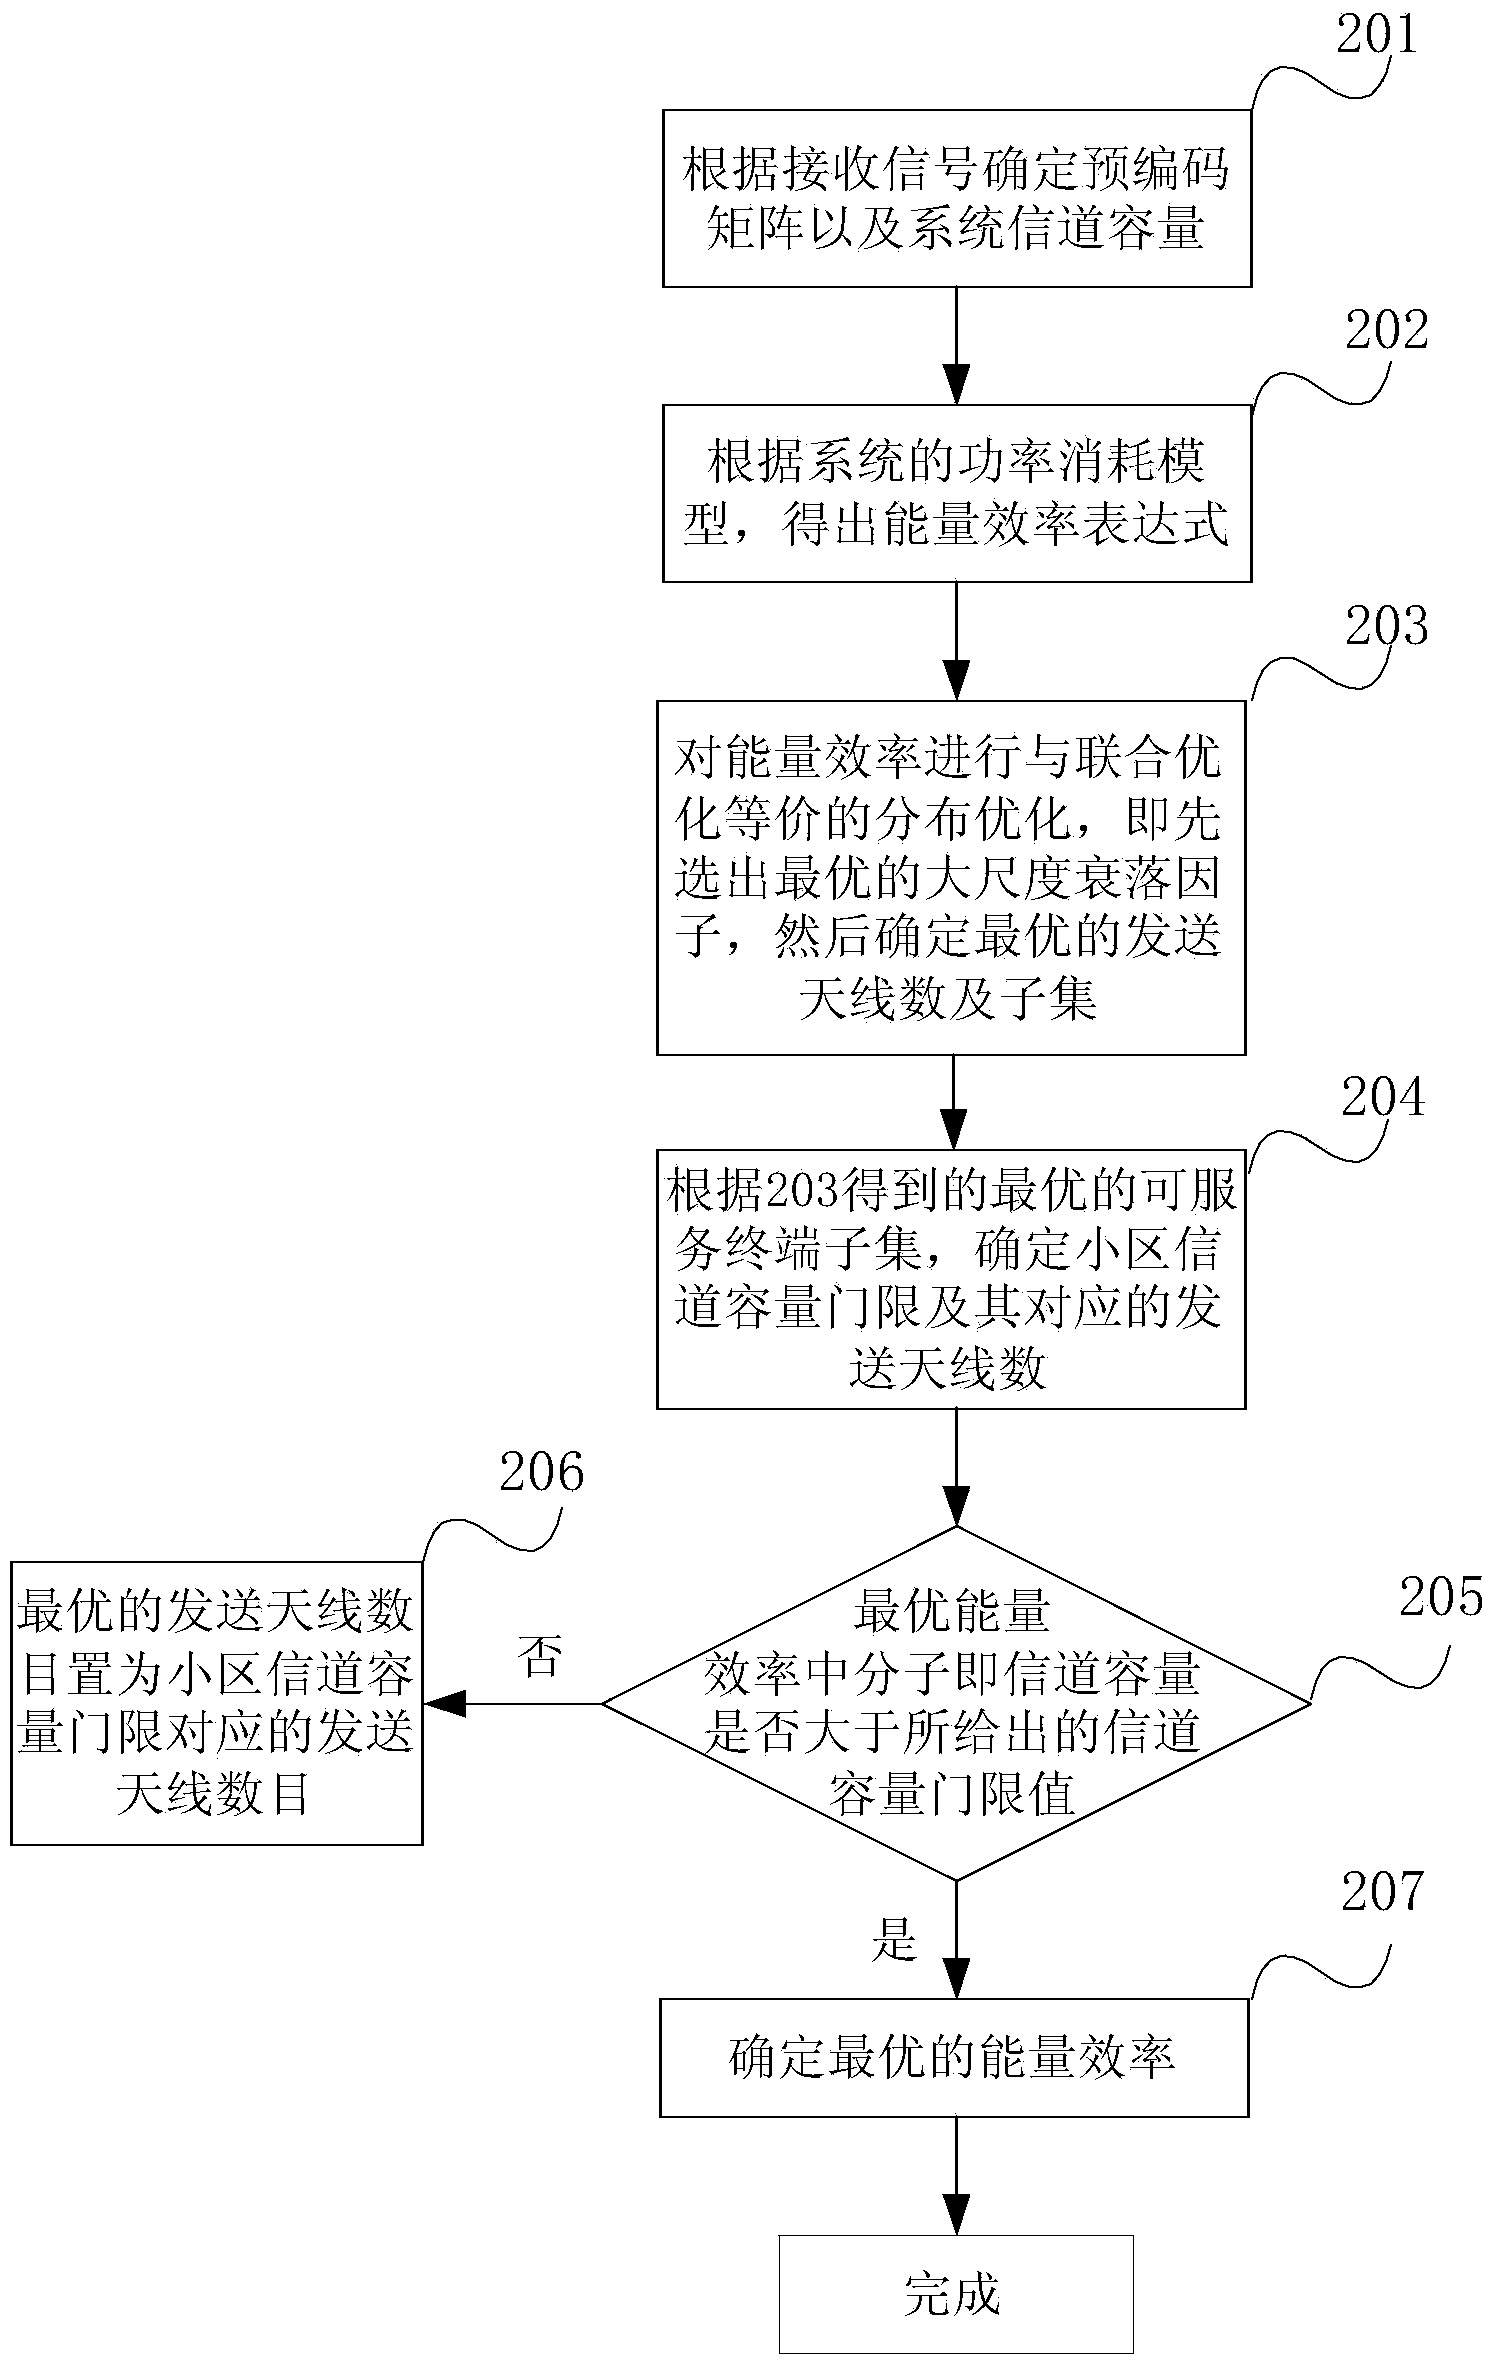 Antenna selection method aiming at energy effectiveness of Massive MIMO (Multiple Input Multiple Output) communication system